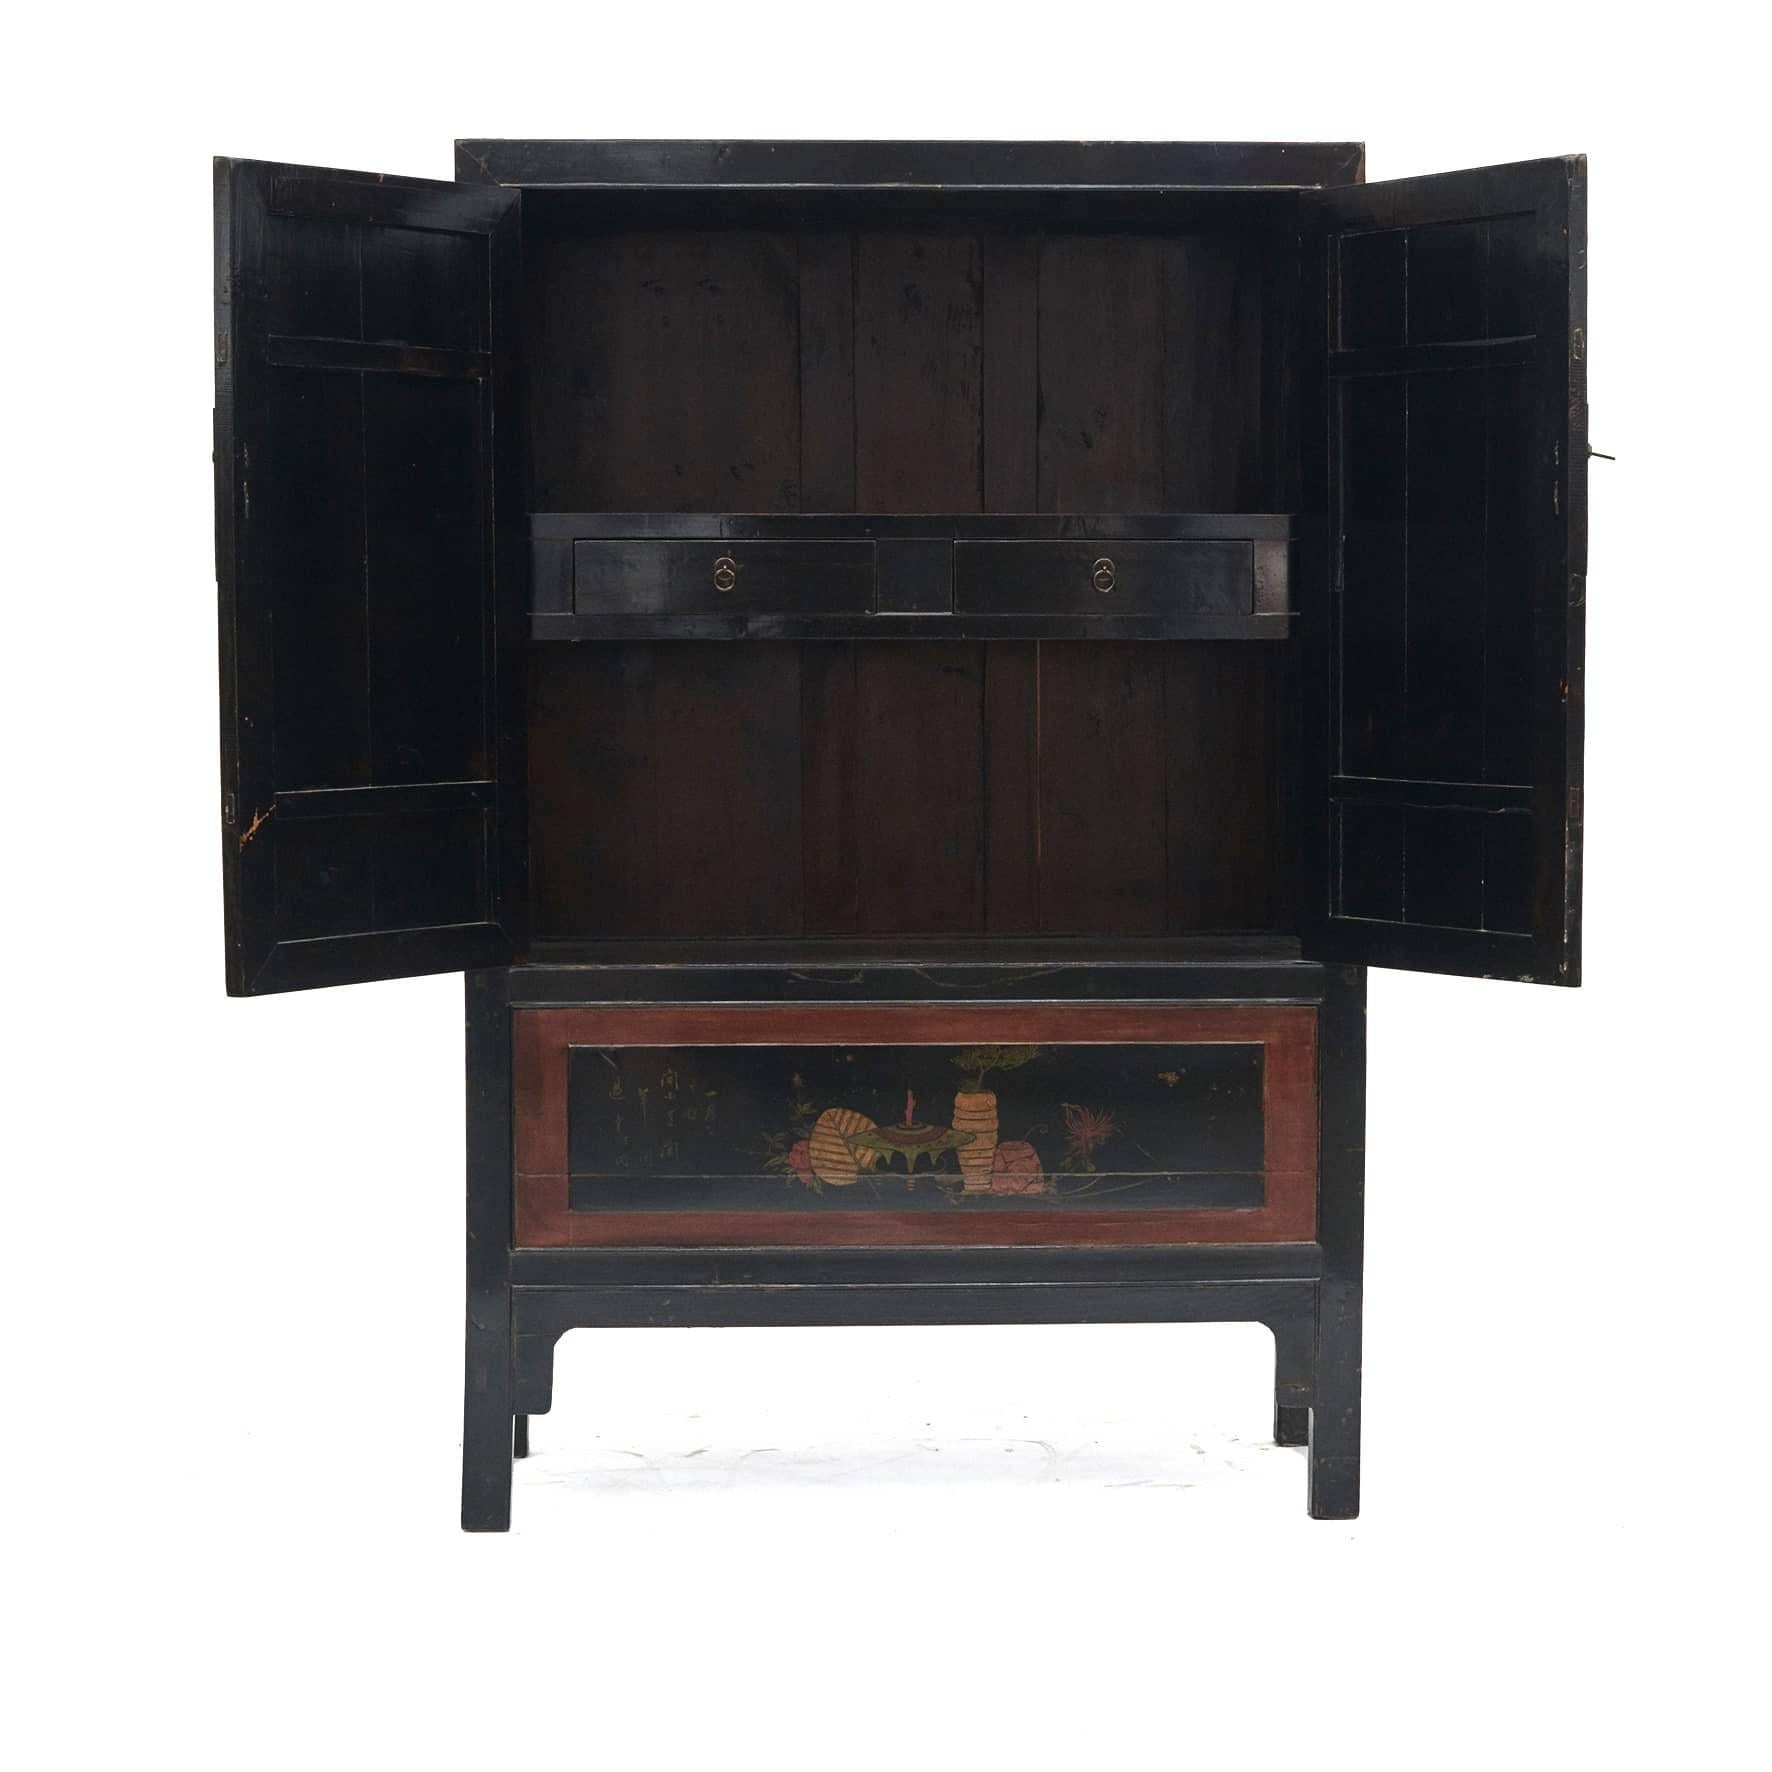 Original decorated cabinet, From Fujian Province 1860 - 1880.
Black lacquer base, frames with dark red lacquer.
Decorations in the form of flowers etc. in polychrome lacquer.
Pair of doors with rectangular metal fittings.

Behind doors, shelf